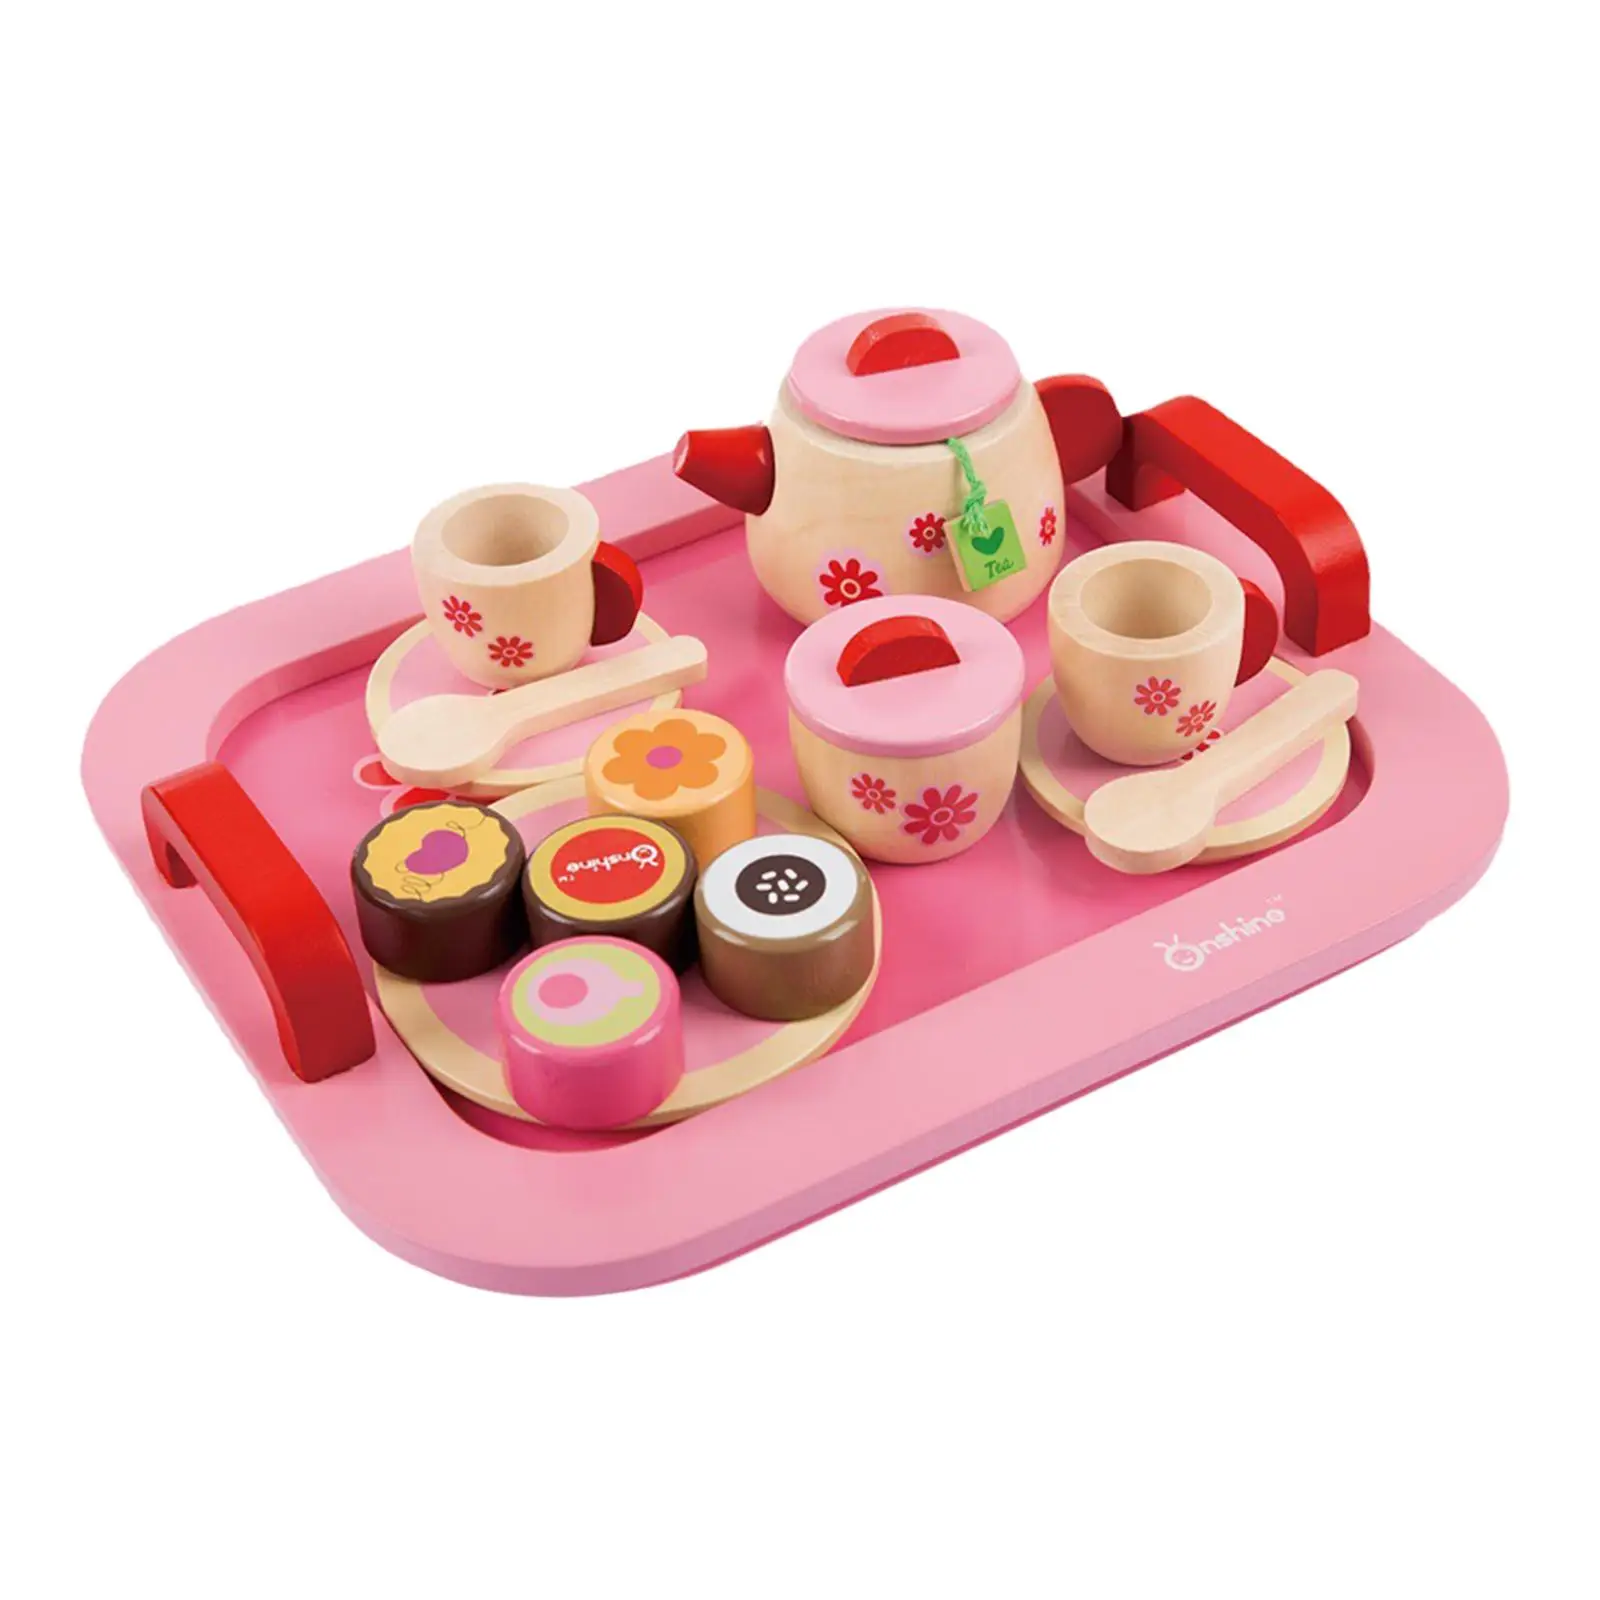 Wooden Pretend Play Tea Party Set Simulation Teacup Toy for Children 3+